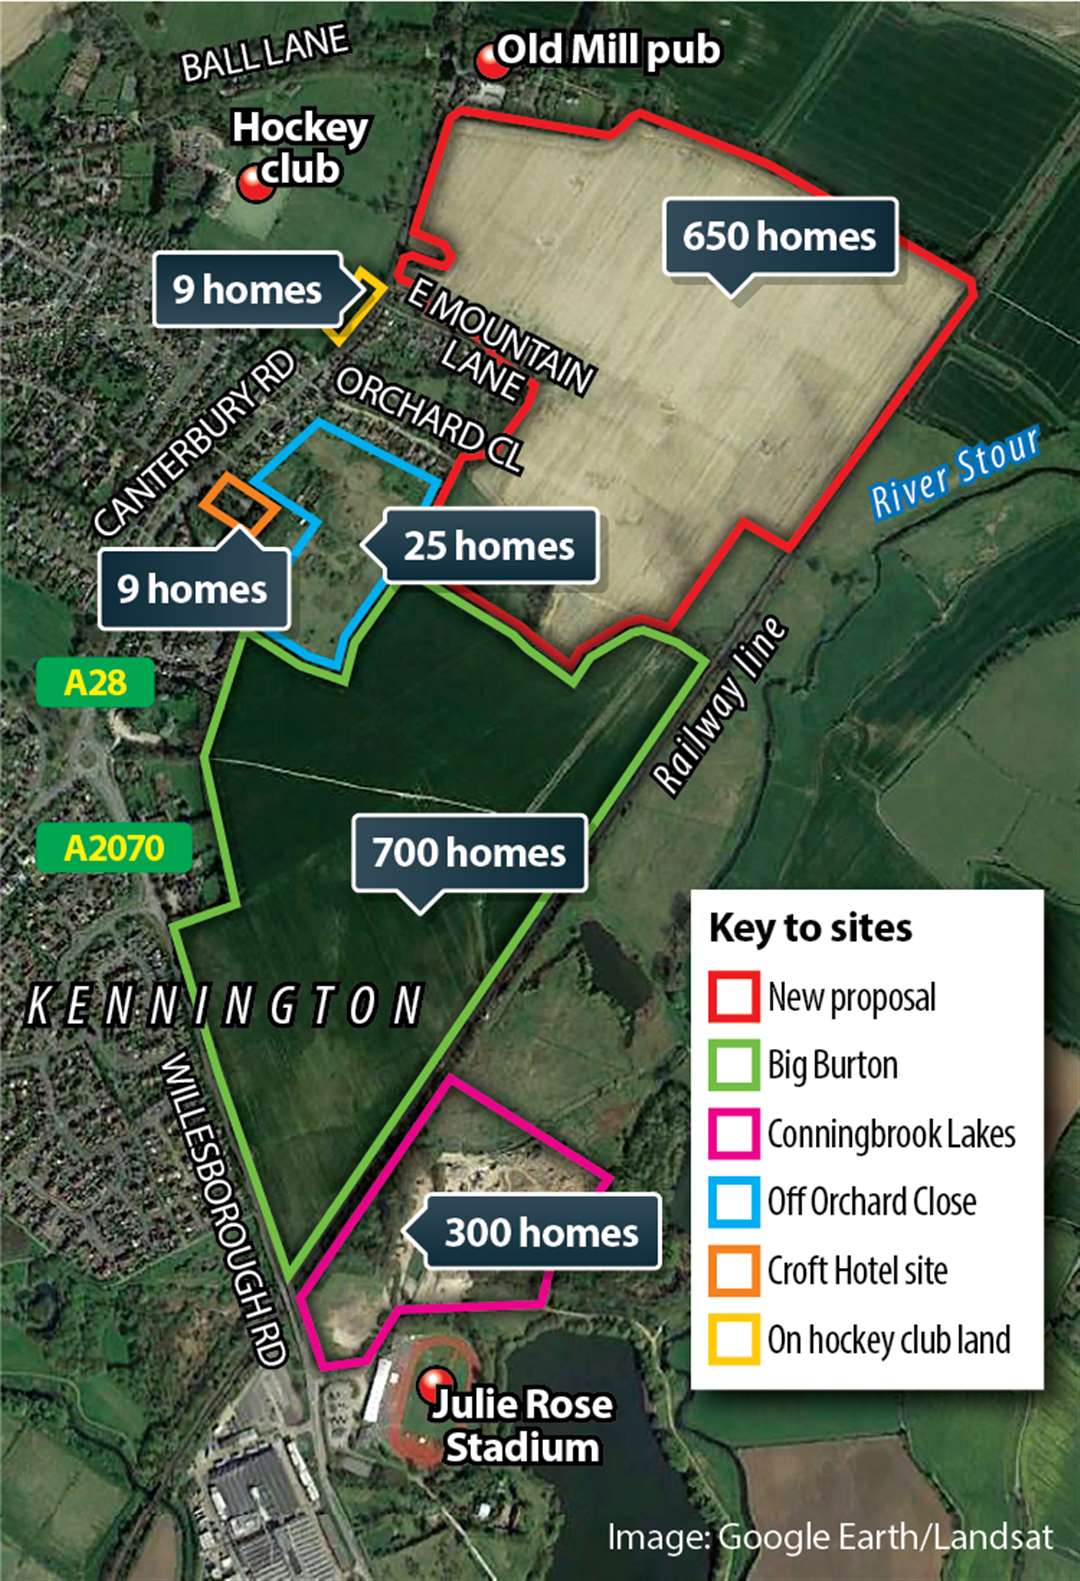 1,700 homes are now proposed for Kennington